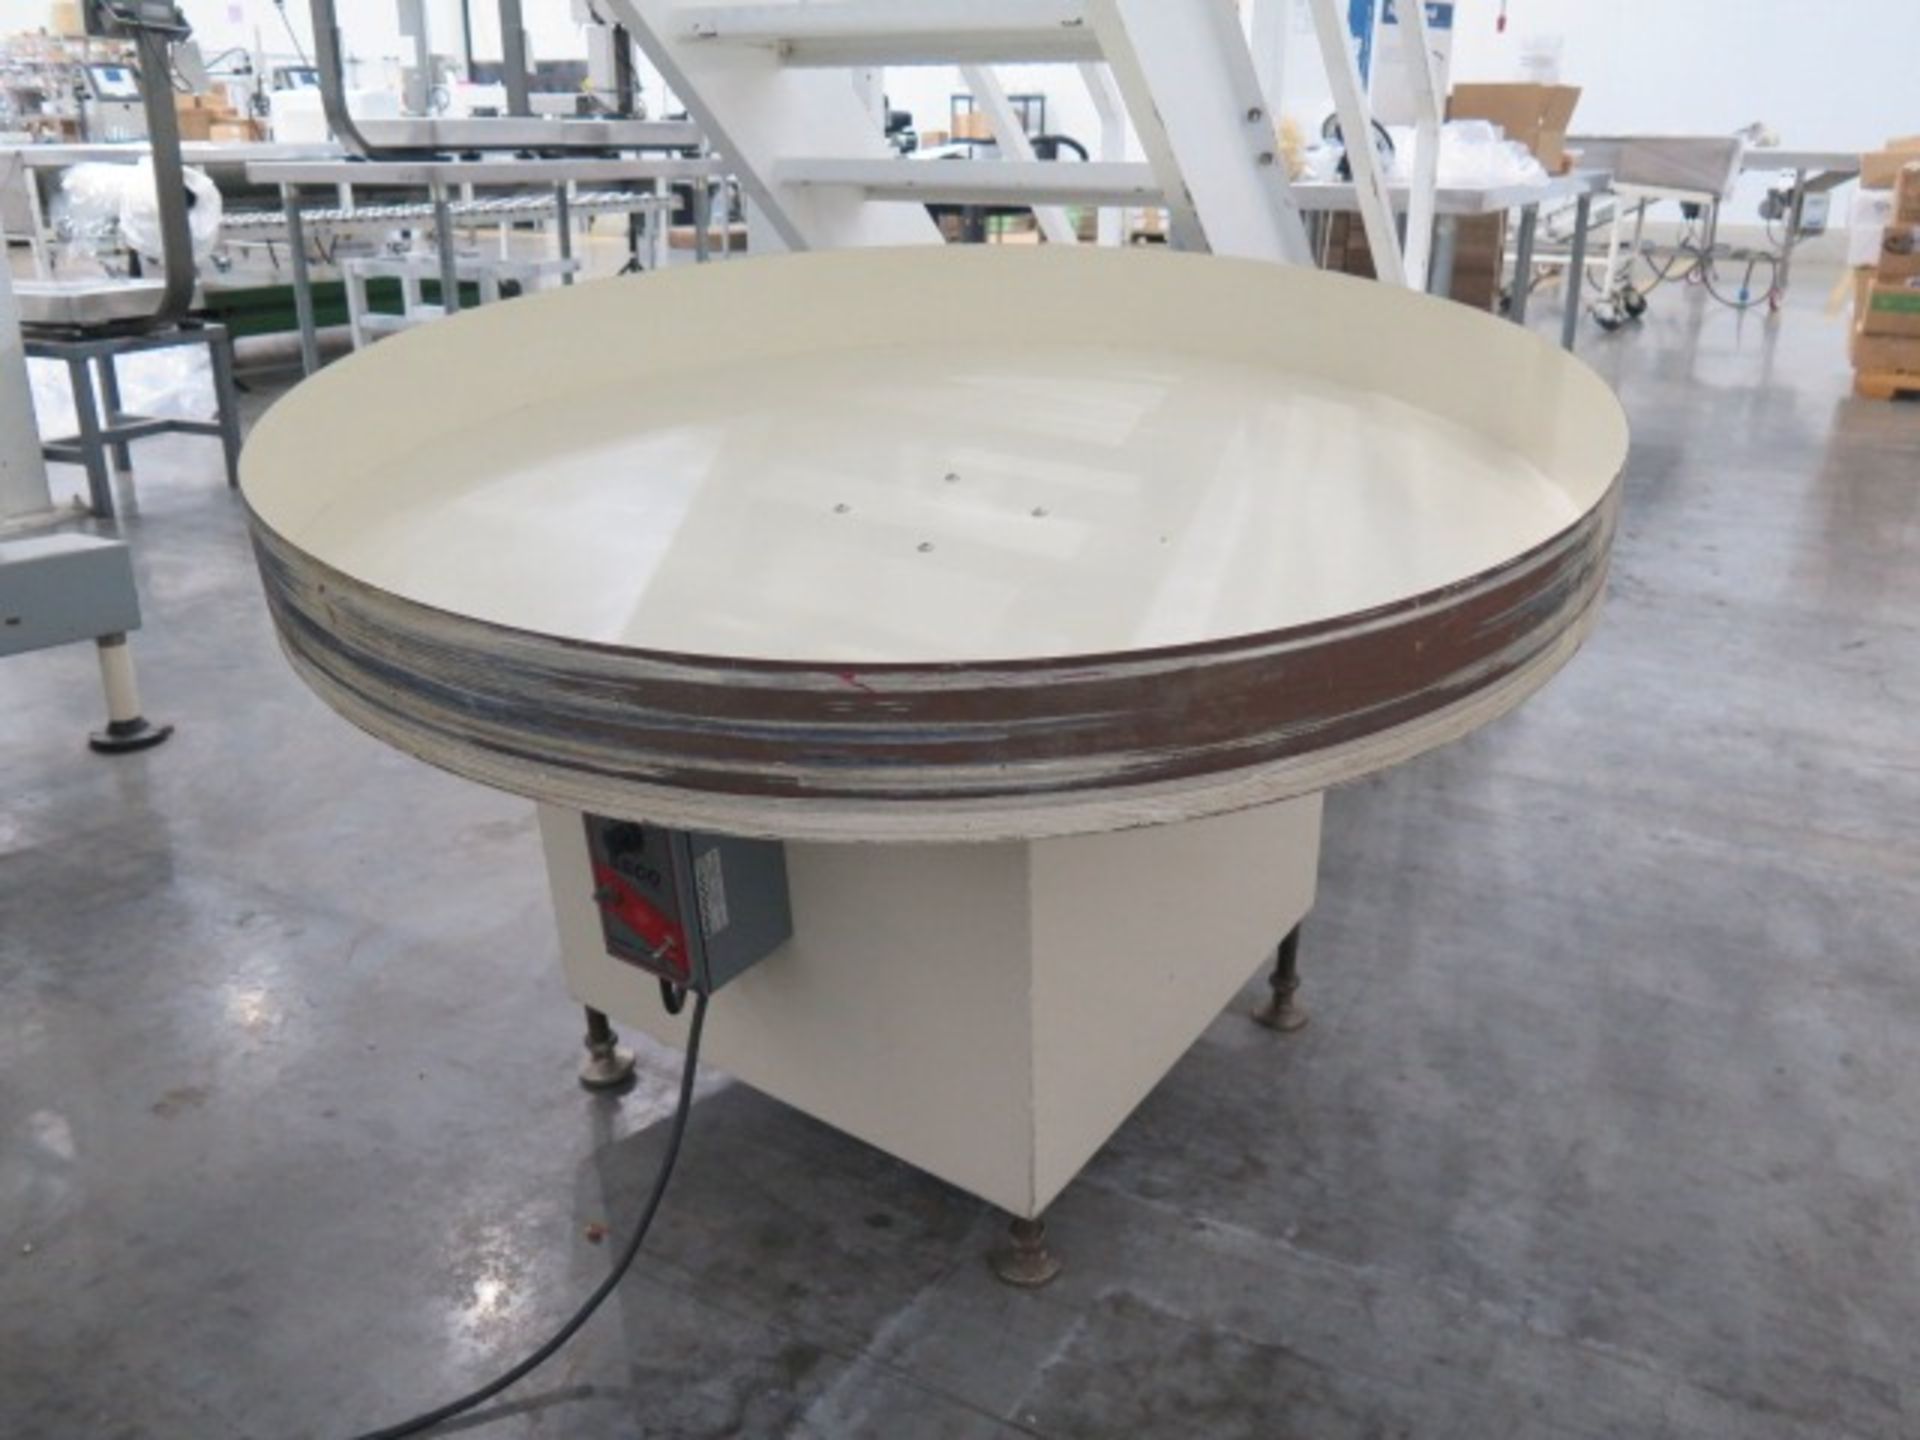 Belco Model BLS 4805 S1A0 Accumulation Table, S/N 12800 | Rig Fee: $100 - Image 2 of 9